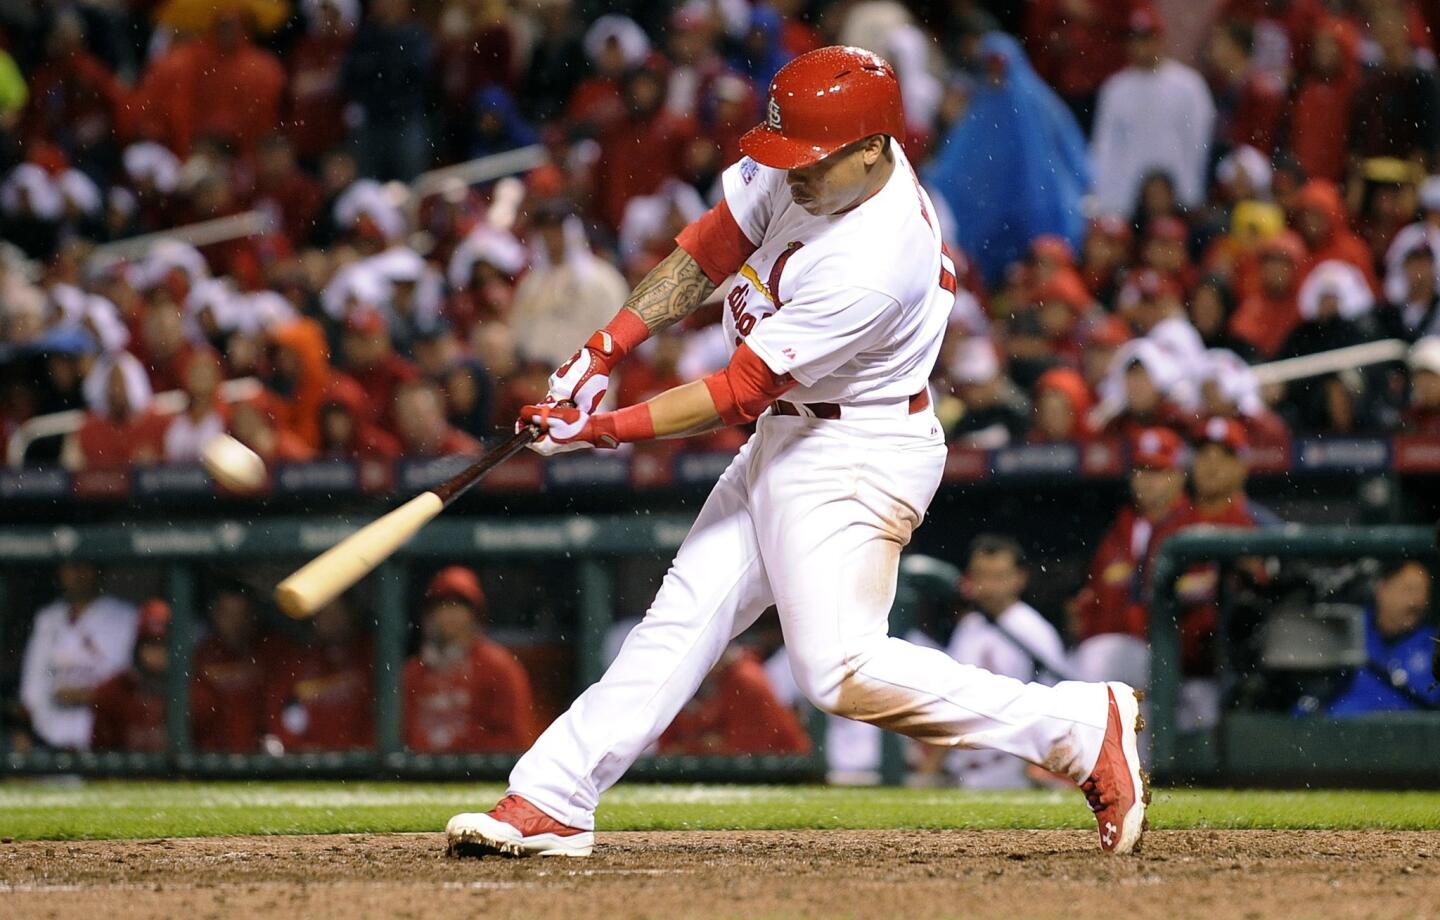 St. Louis Cardinals second baseman Kolten Wong hits a two-run home run off Dodgers reliever Scott Elbert (not pictured) during the seventh inning of a 3-1 win over the Dodgers in Game 3 of the National League division series Monday.